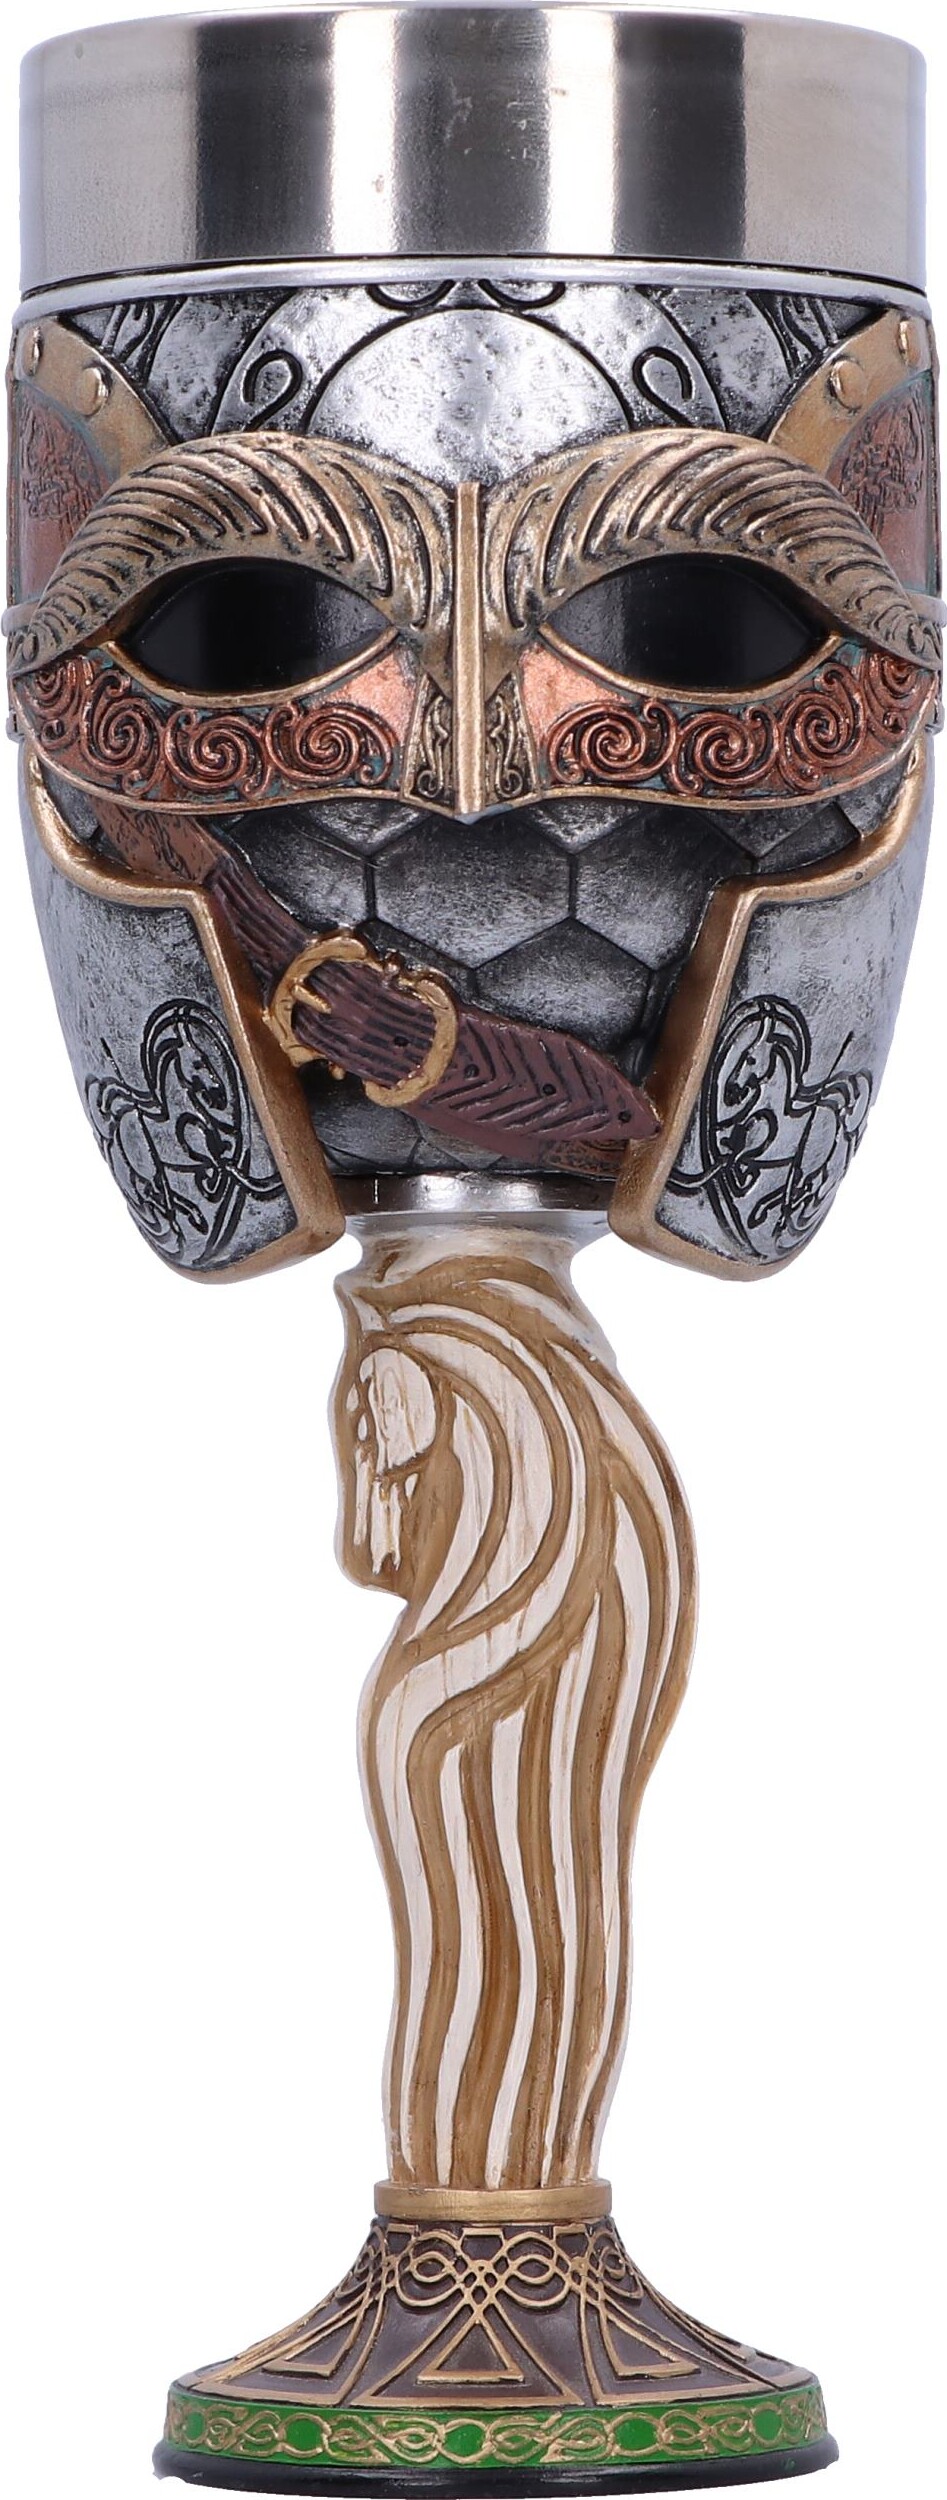 Se Lord Of The Rings Replica - Rohan Goblet - Nemesis Now - 19,5 Cm hos Gucca.dk